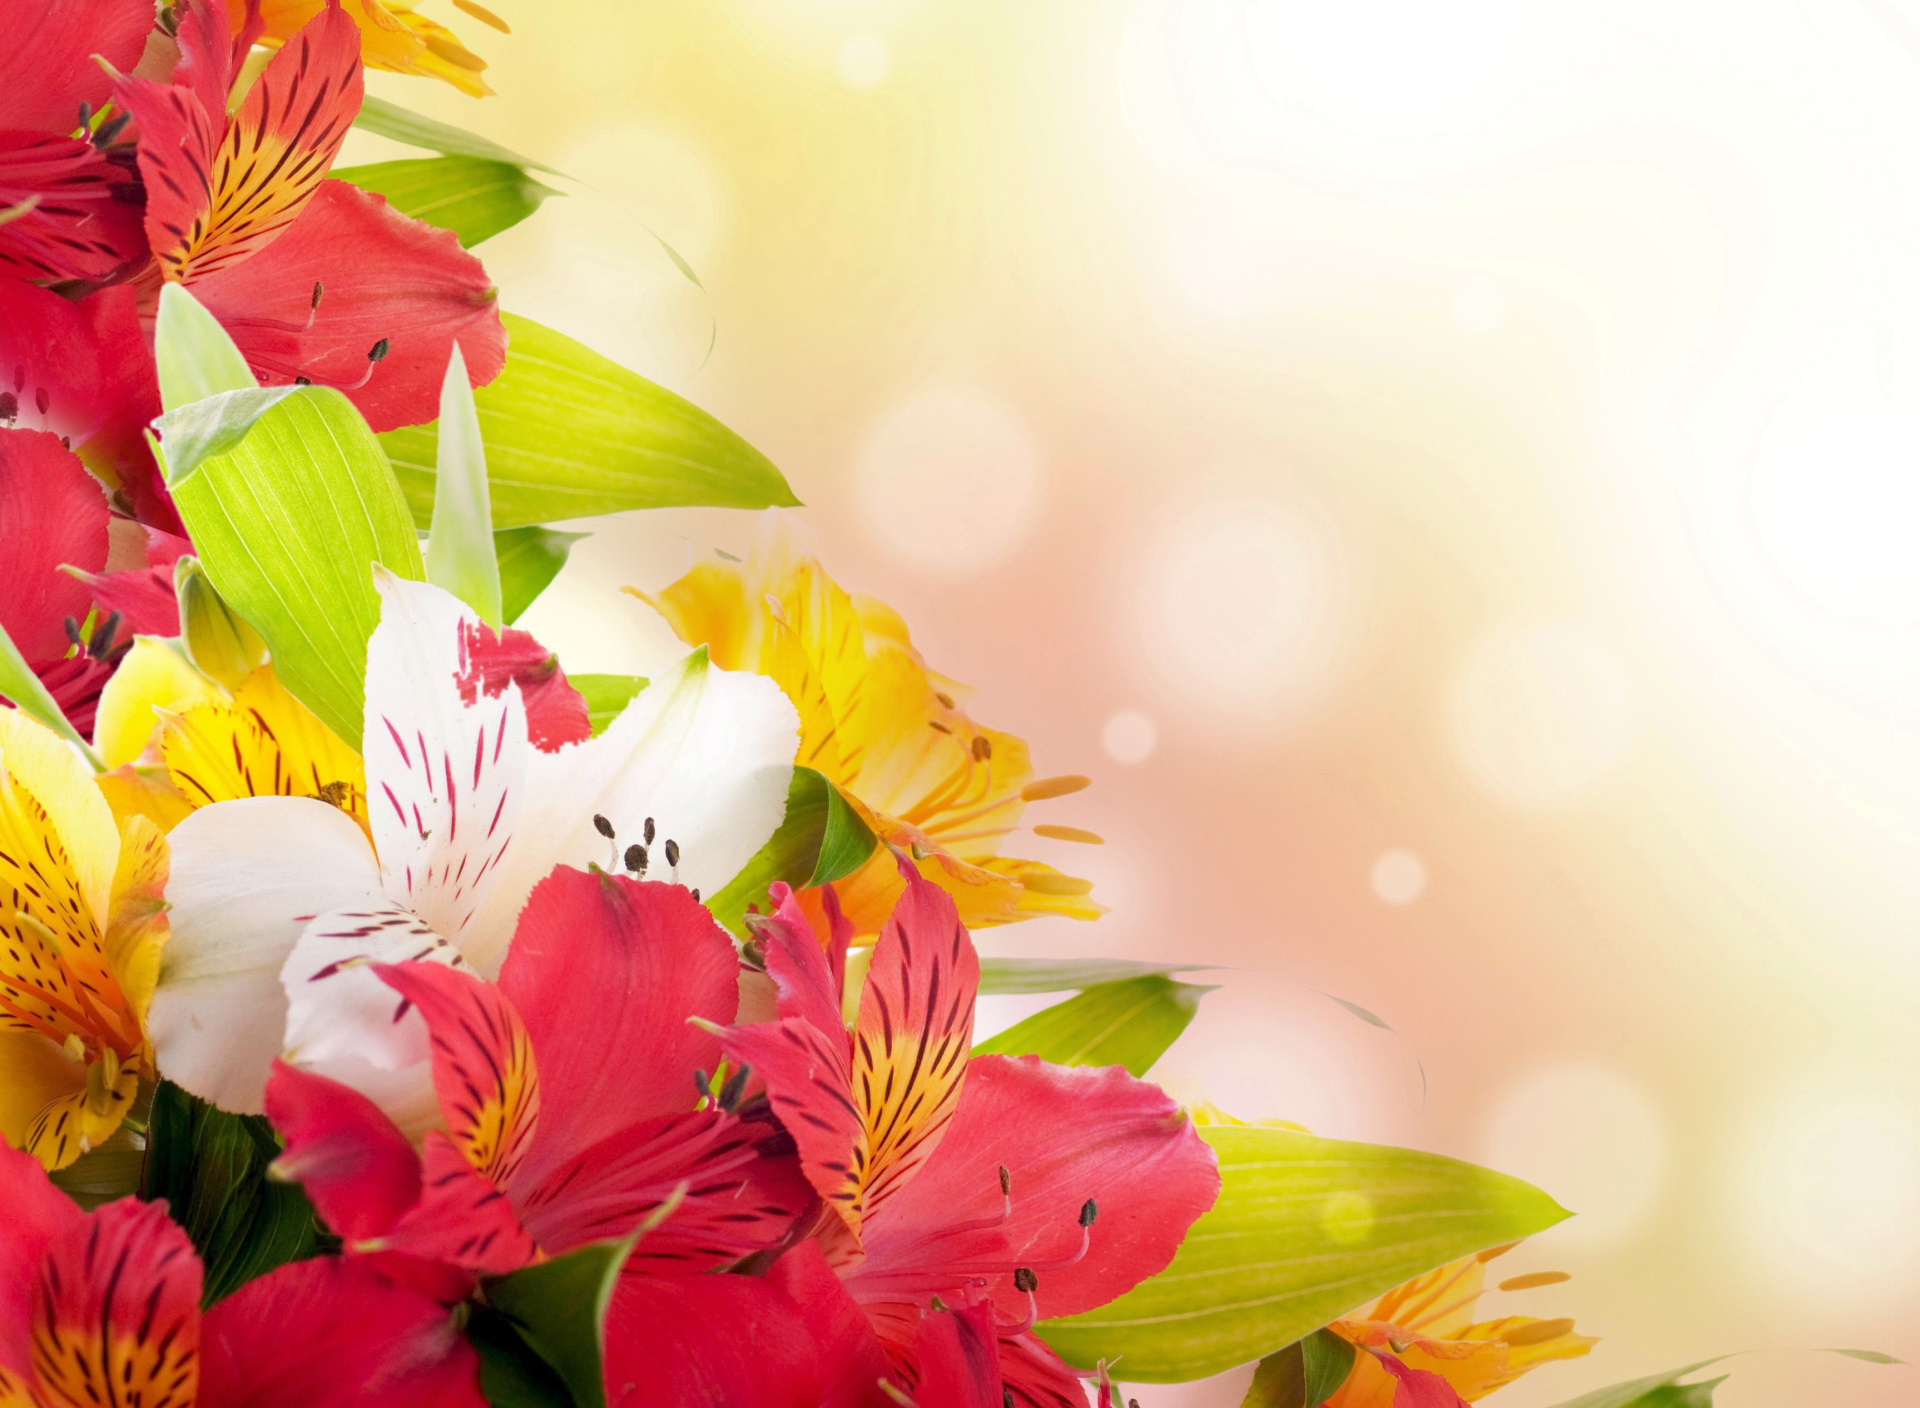 Das Flowers for the holiday of March 8 Wallpaper 1920x1408